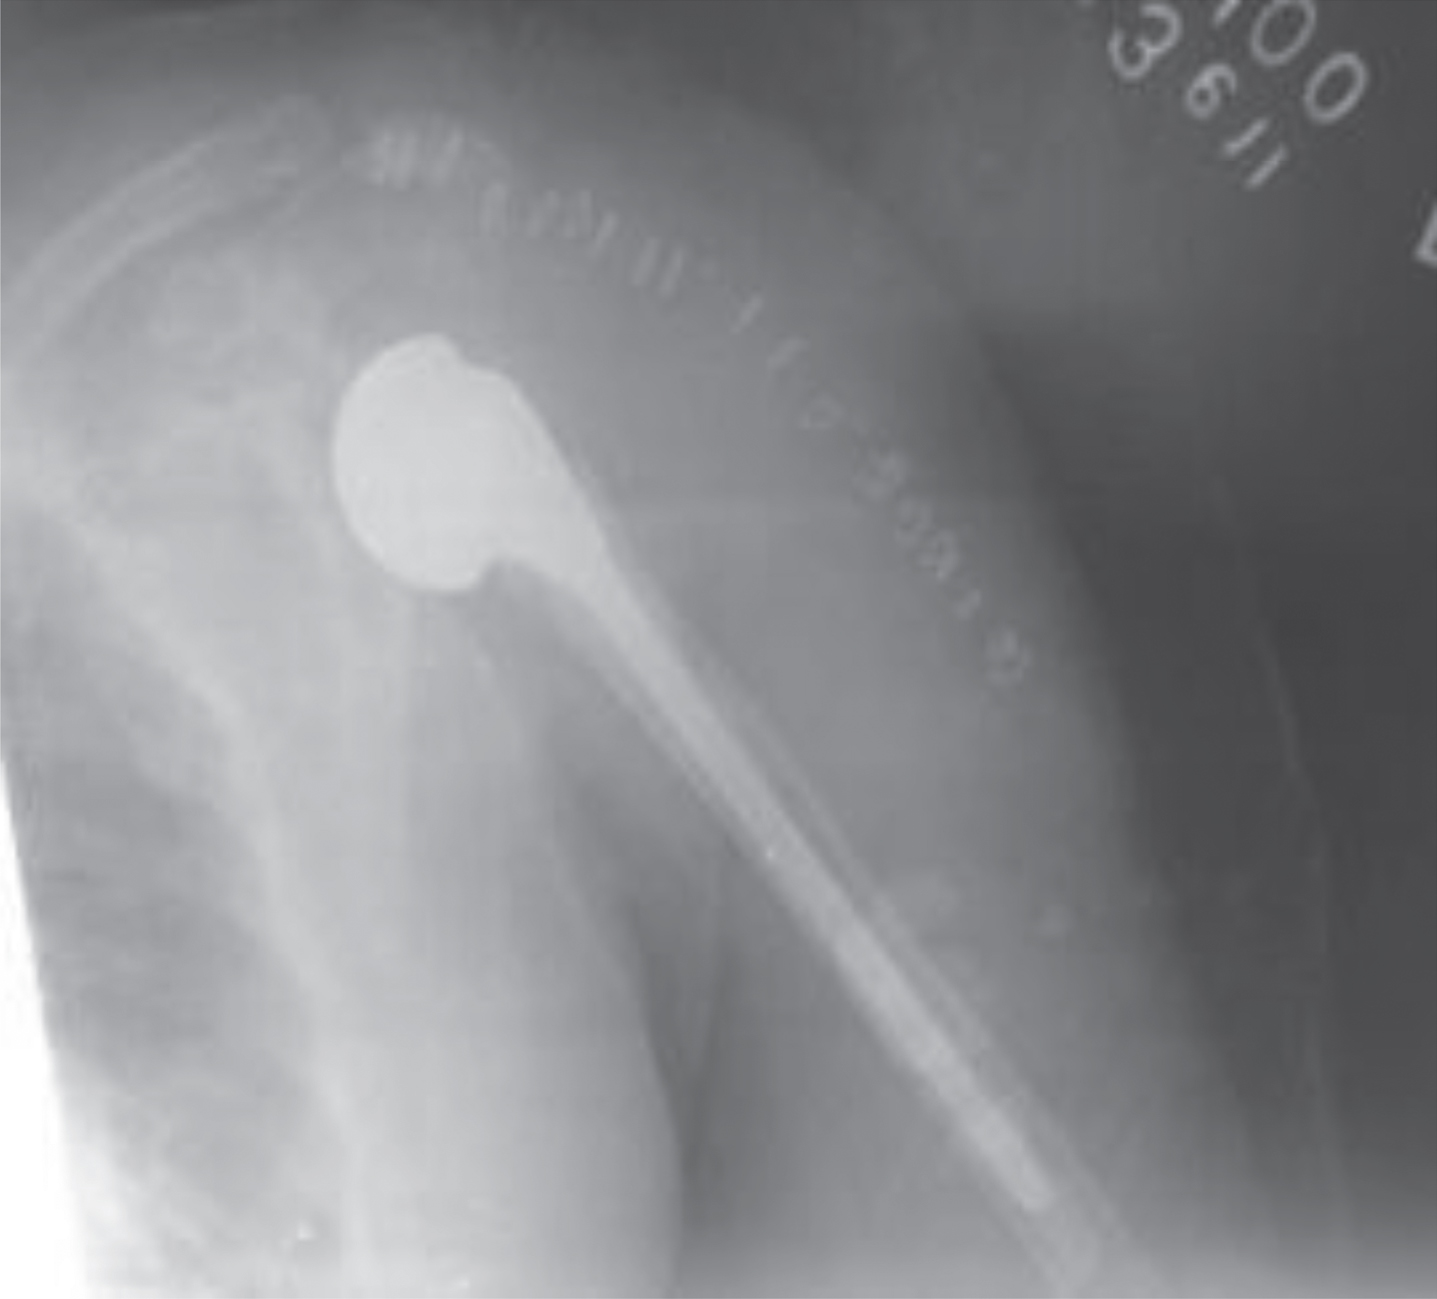 Post-op xray showing cemented proximal humerus prosthesis.